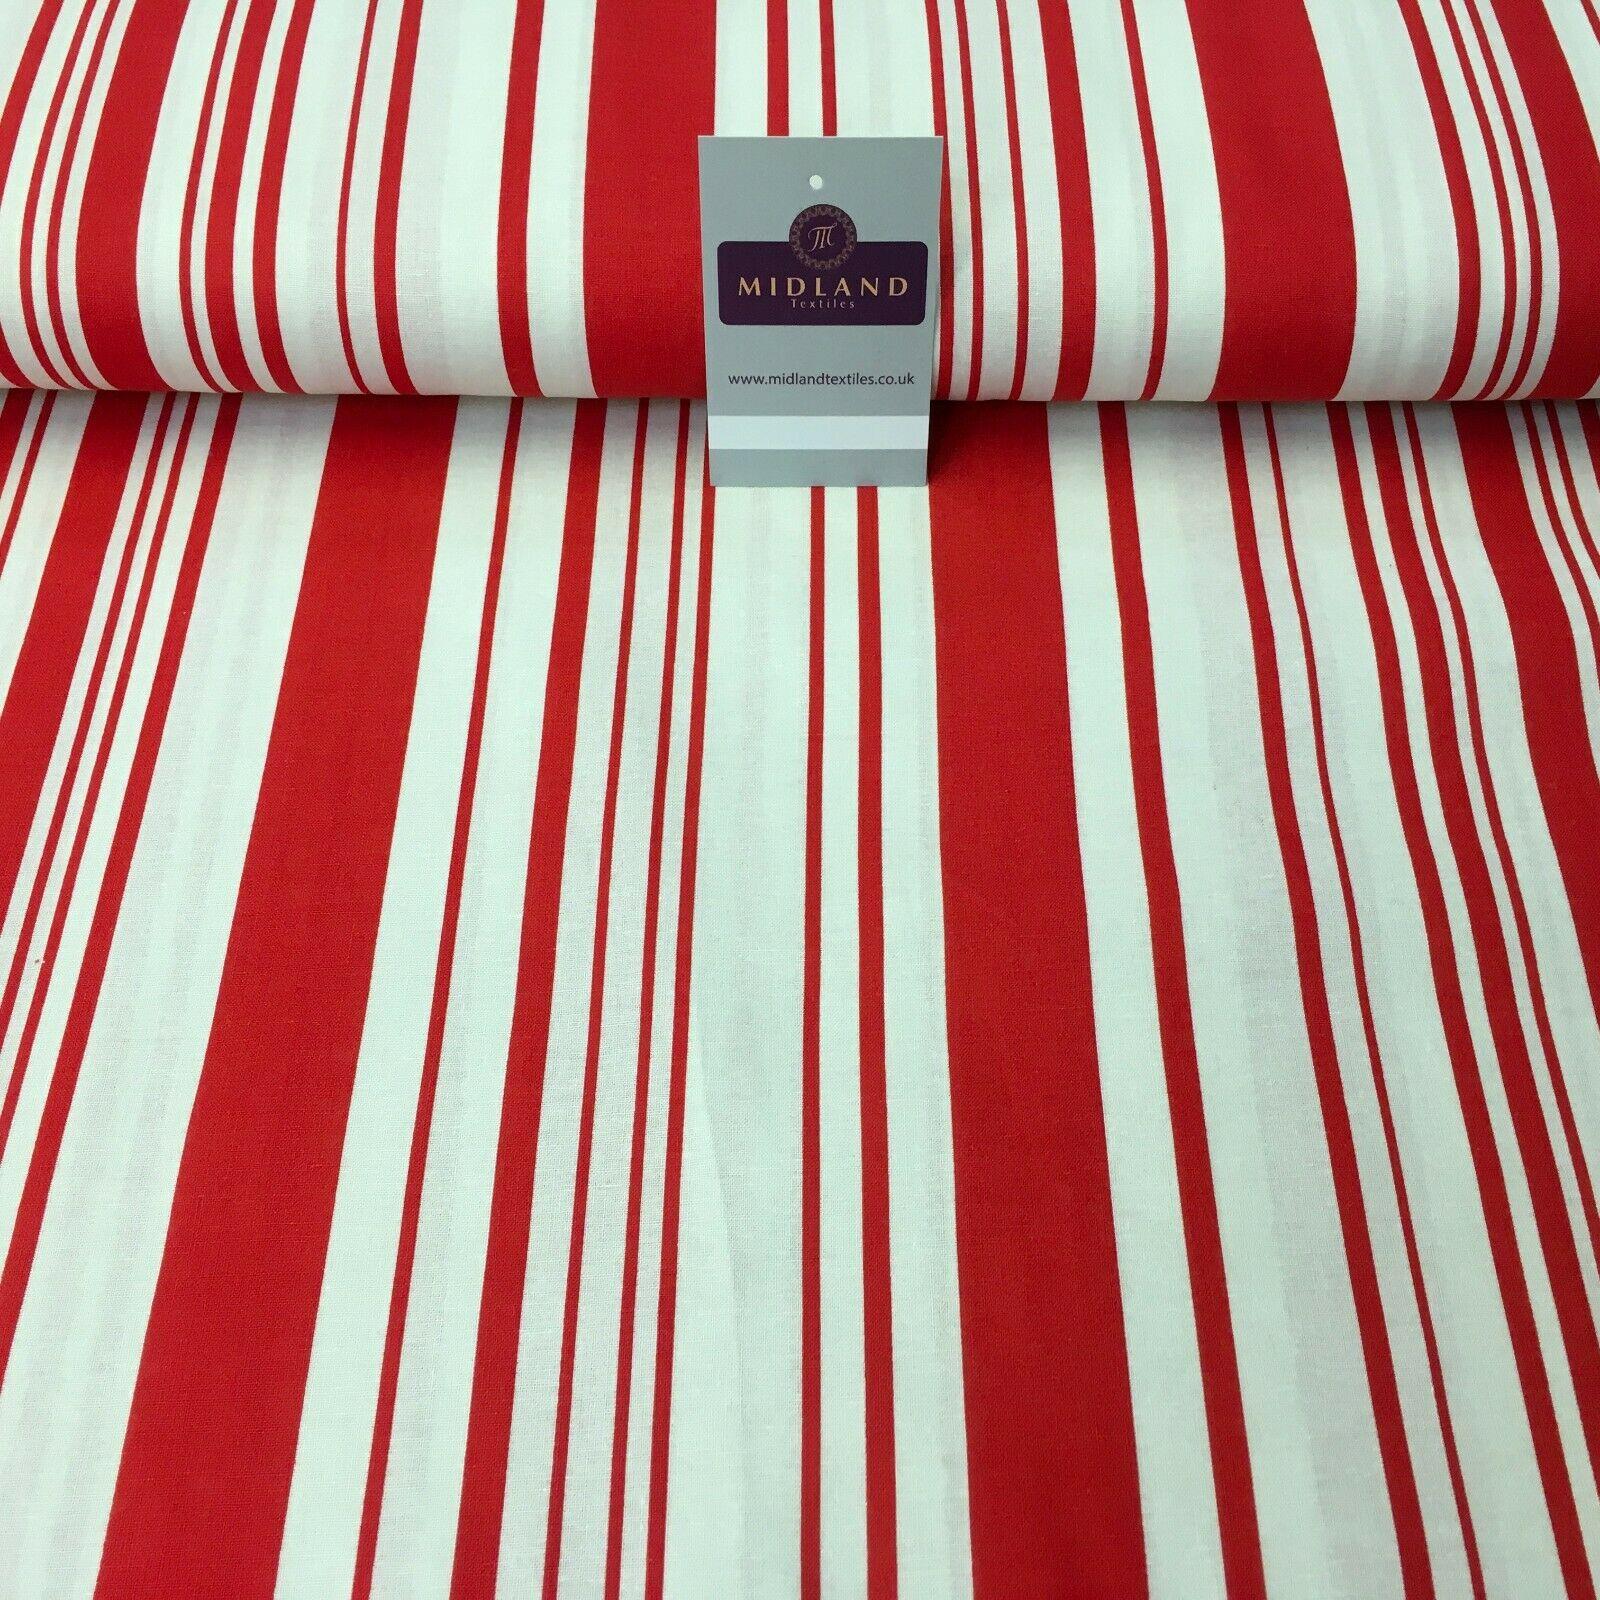 Red Striped Printed Cotton Linen Dress Fabric 150cm Wide MK1086-5